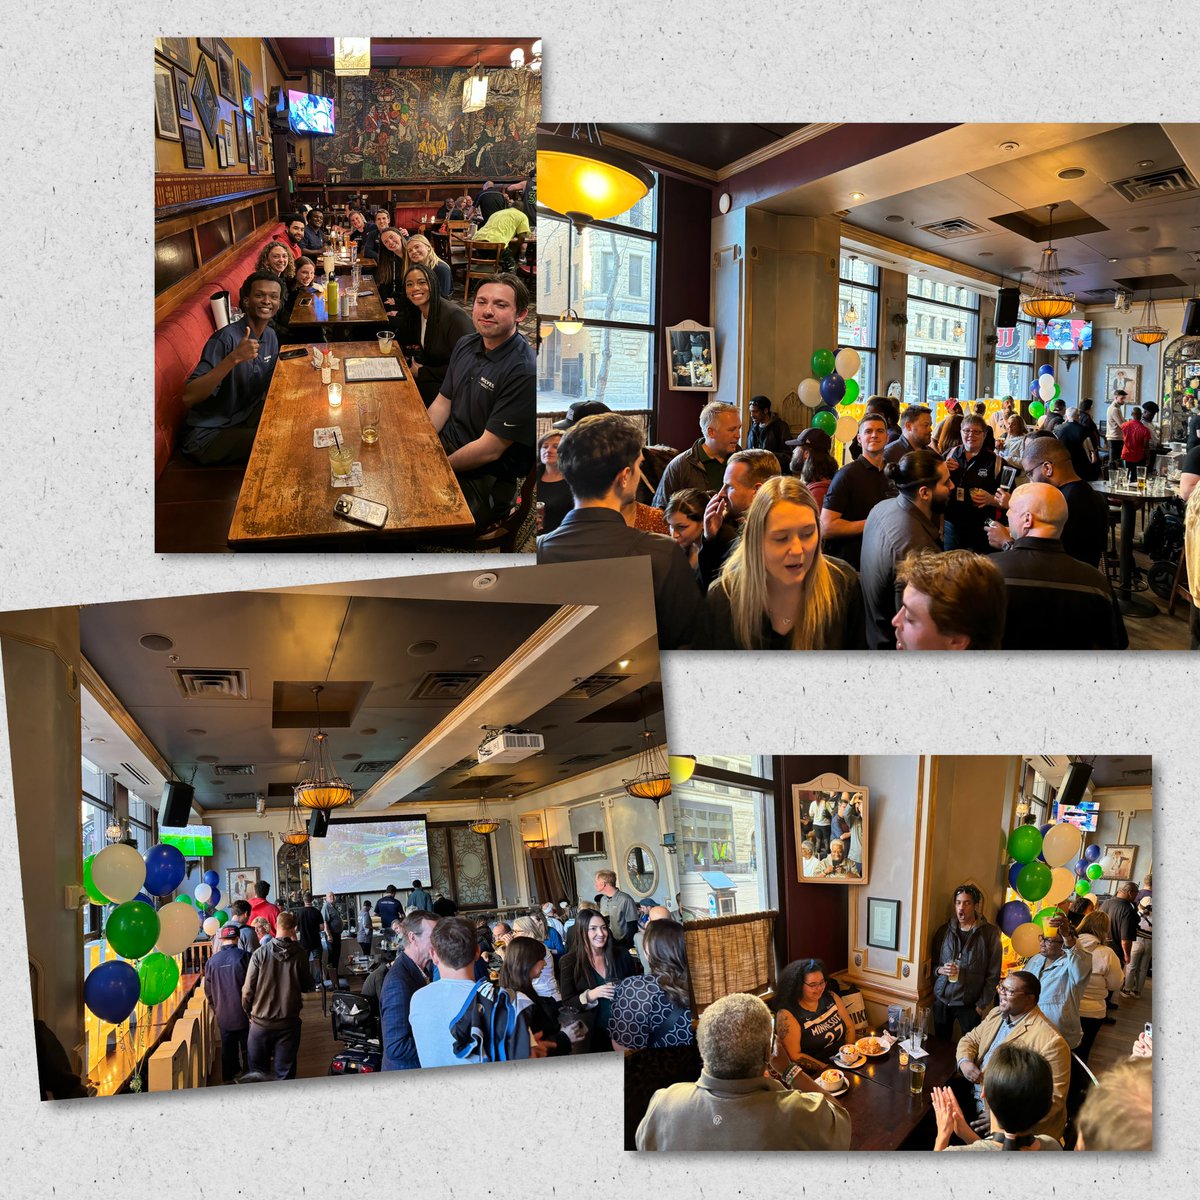 At the end of each regular season we get together with all of our @timberwolves @targetcentermn game night staff to say thanks for a great season (Regular) in helping all of our sales and service initiatives / creating 1st and lasting impressions - Kieran’s playing great host.